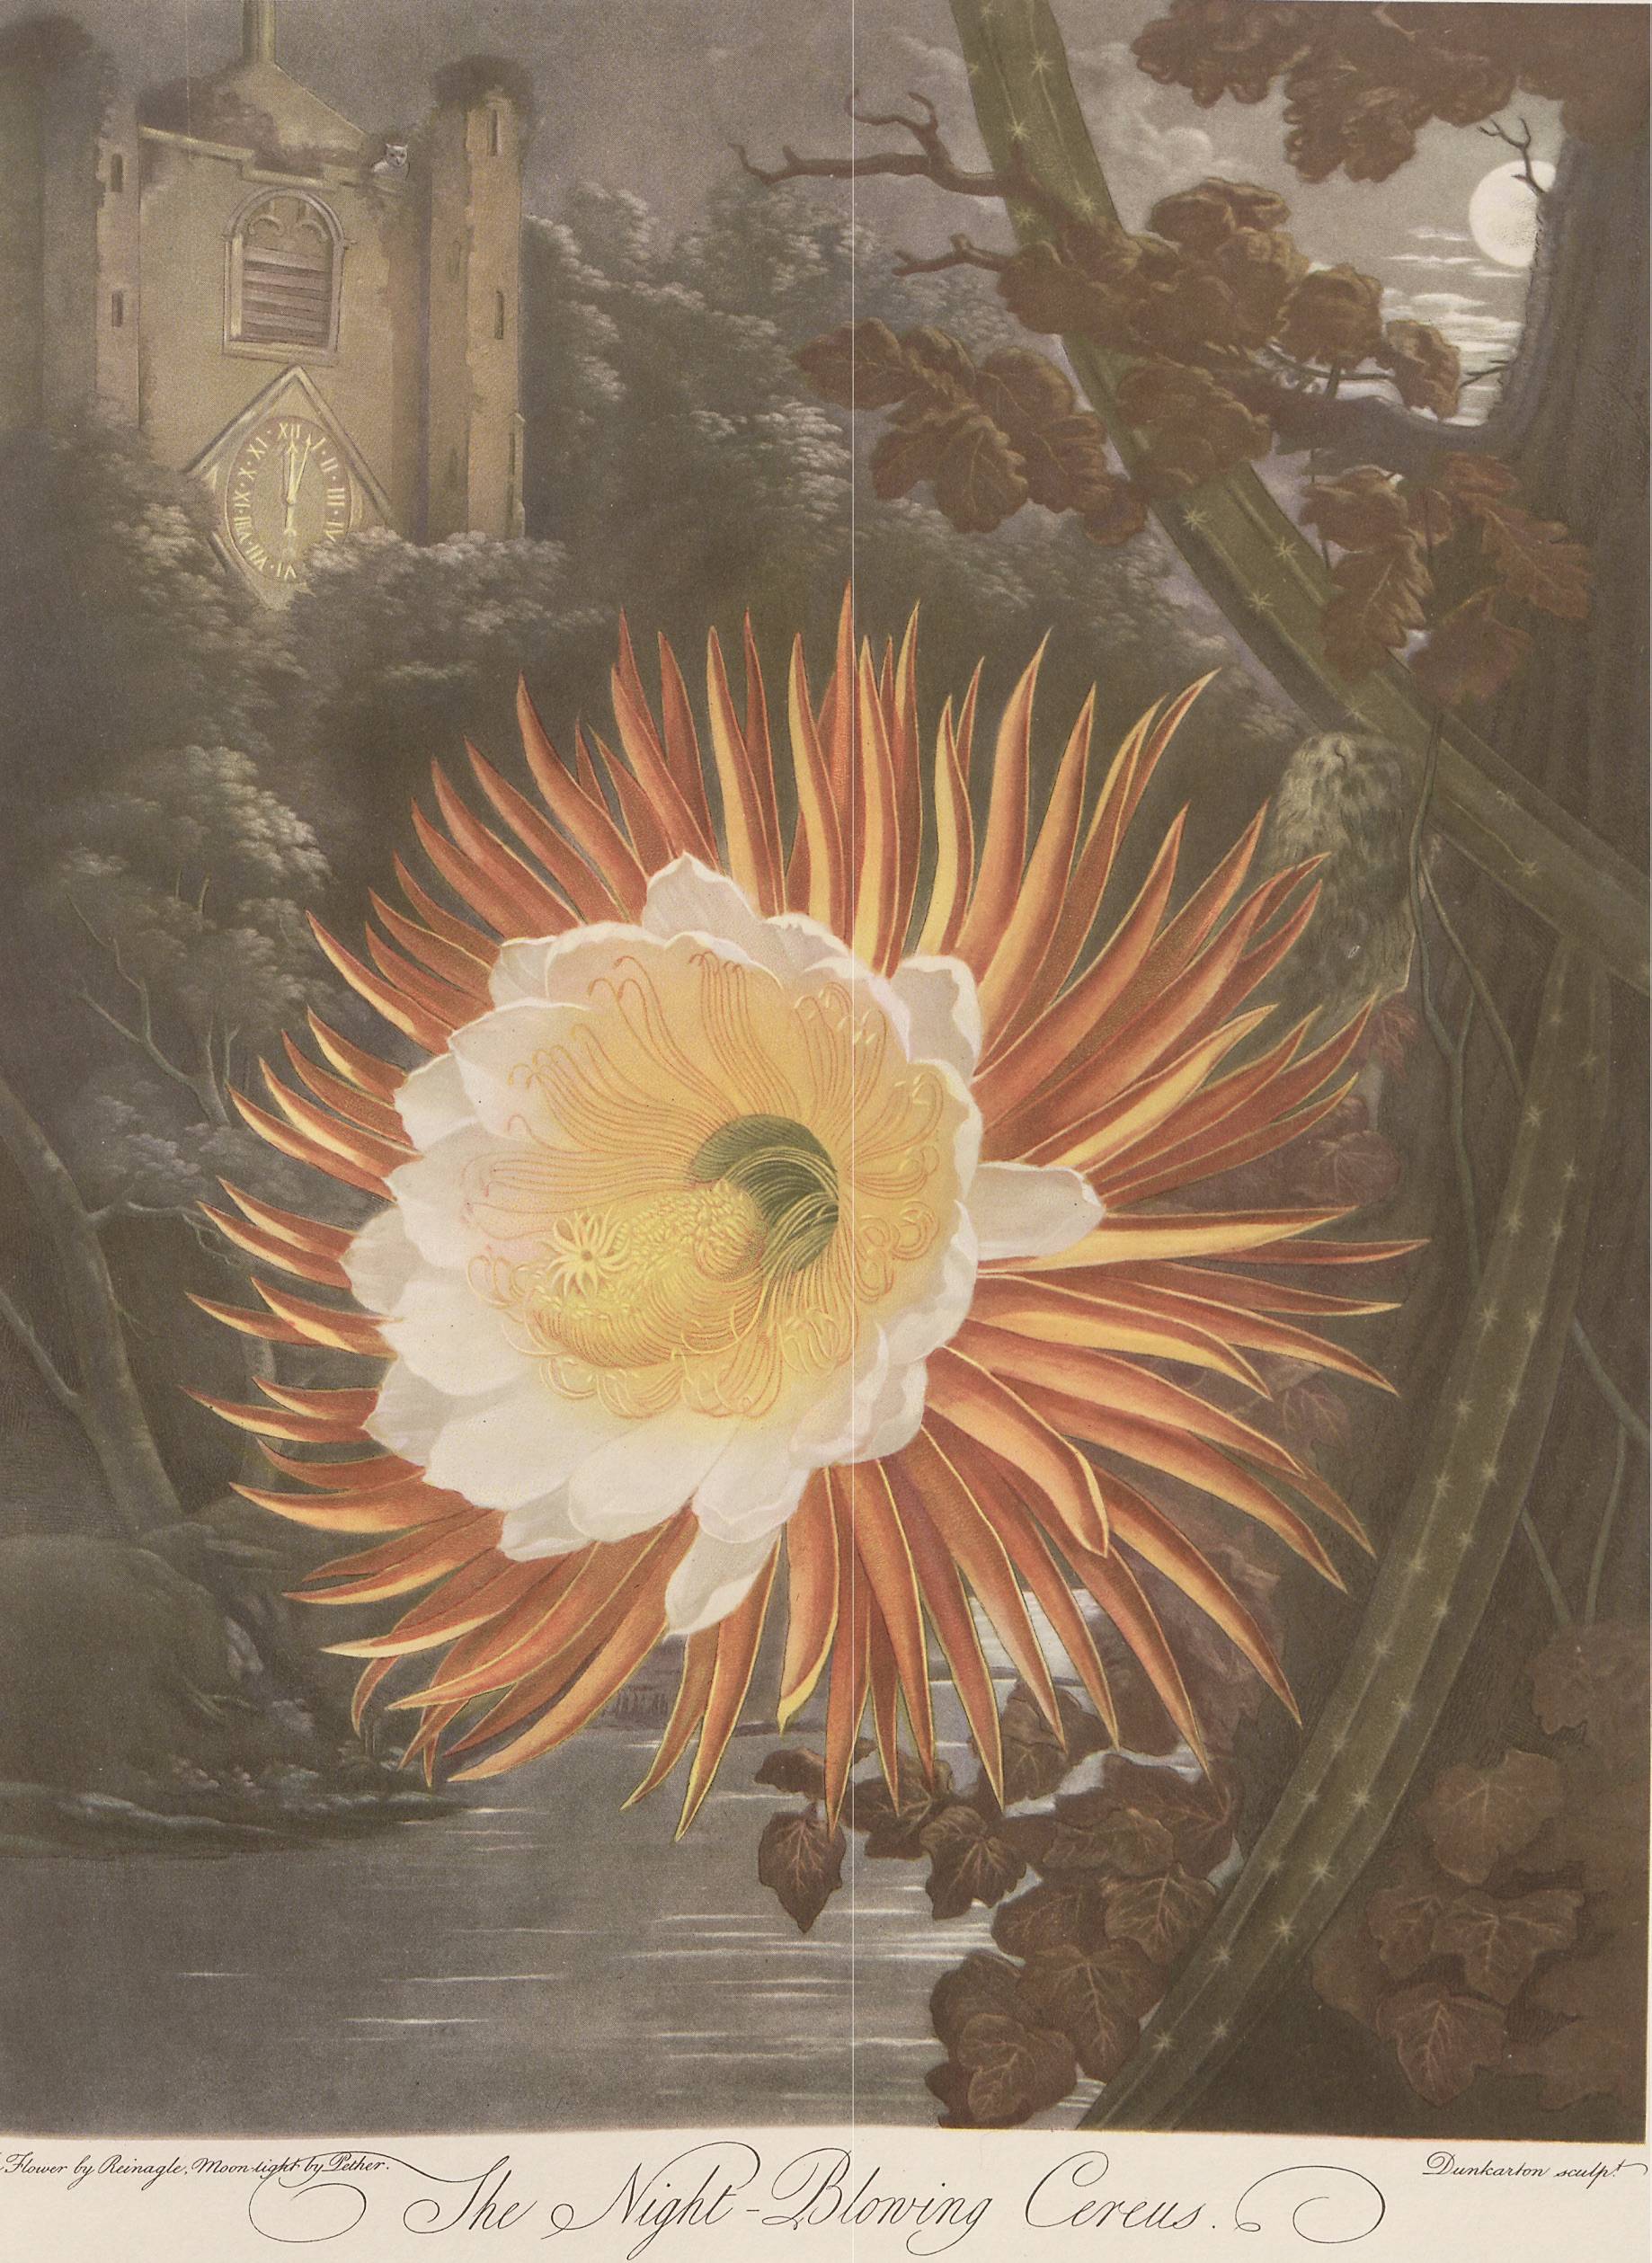 Robert Thornton, Thornton's Temple of Flora: with plates faithfully reproduced from the original engravings…. London: Collins, 1951. Rare Books, University of Melbourne Library.